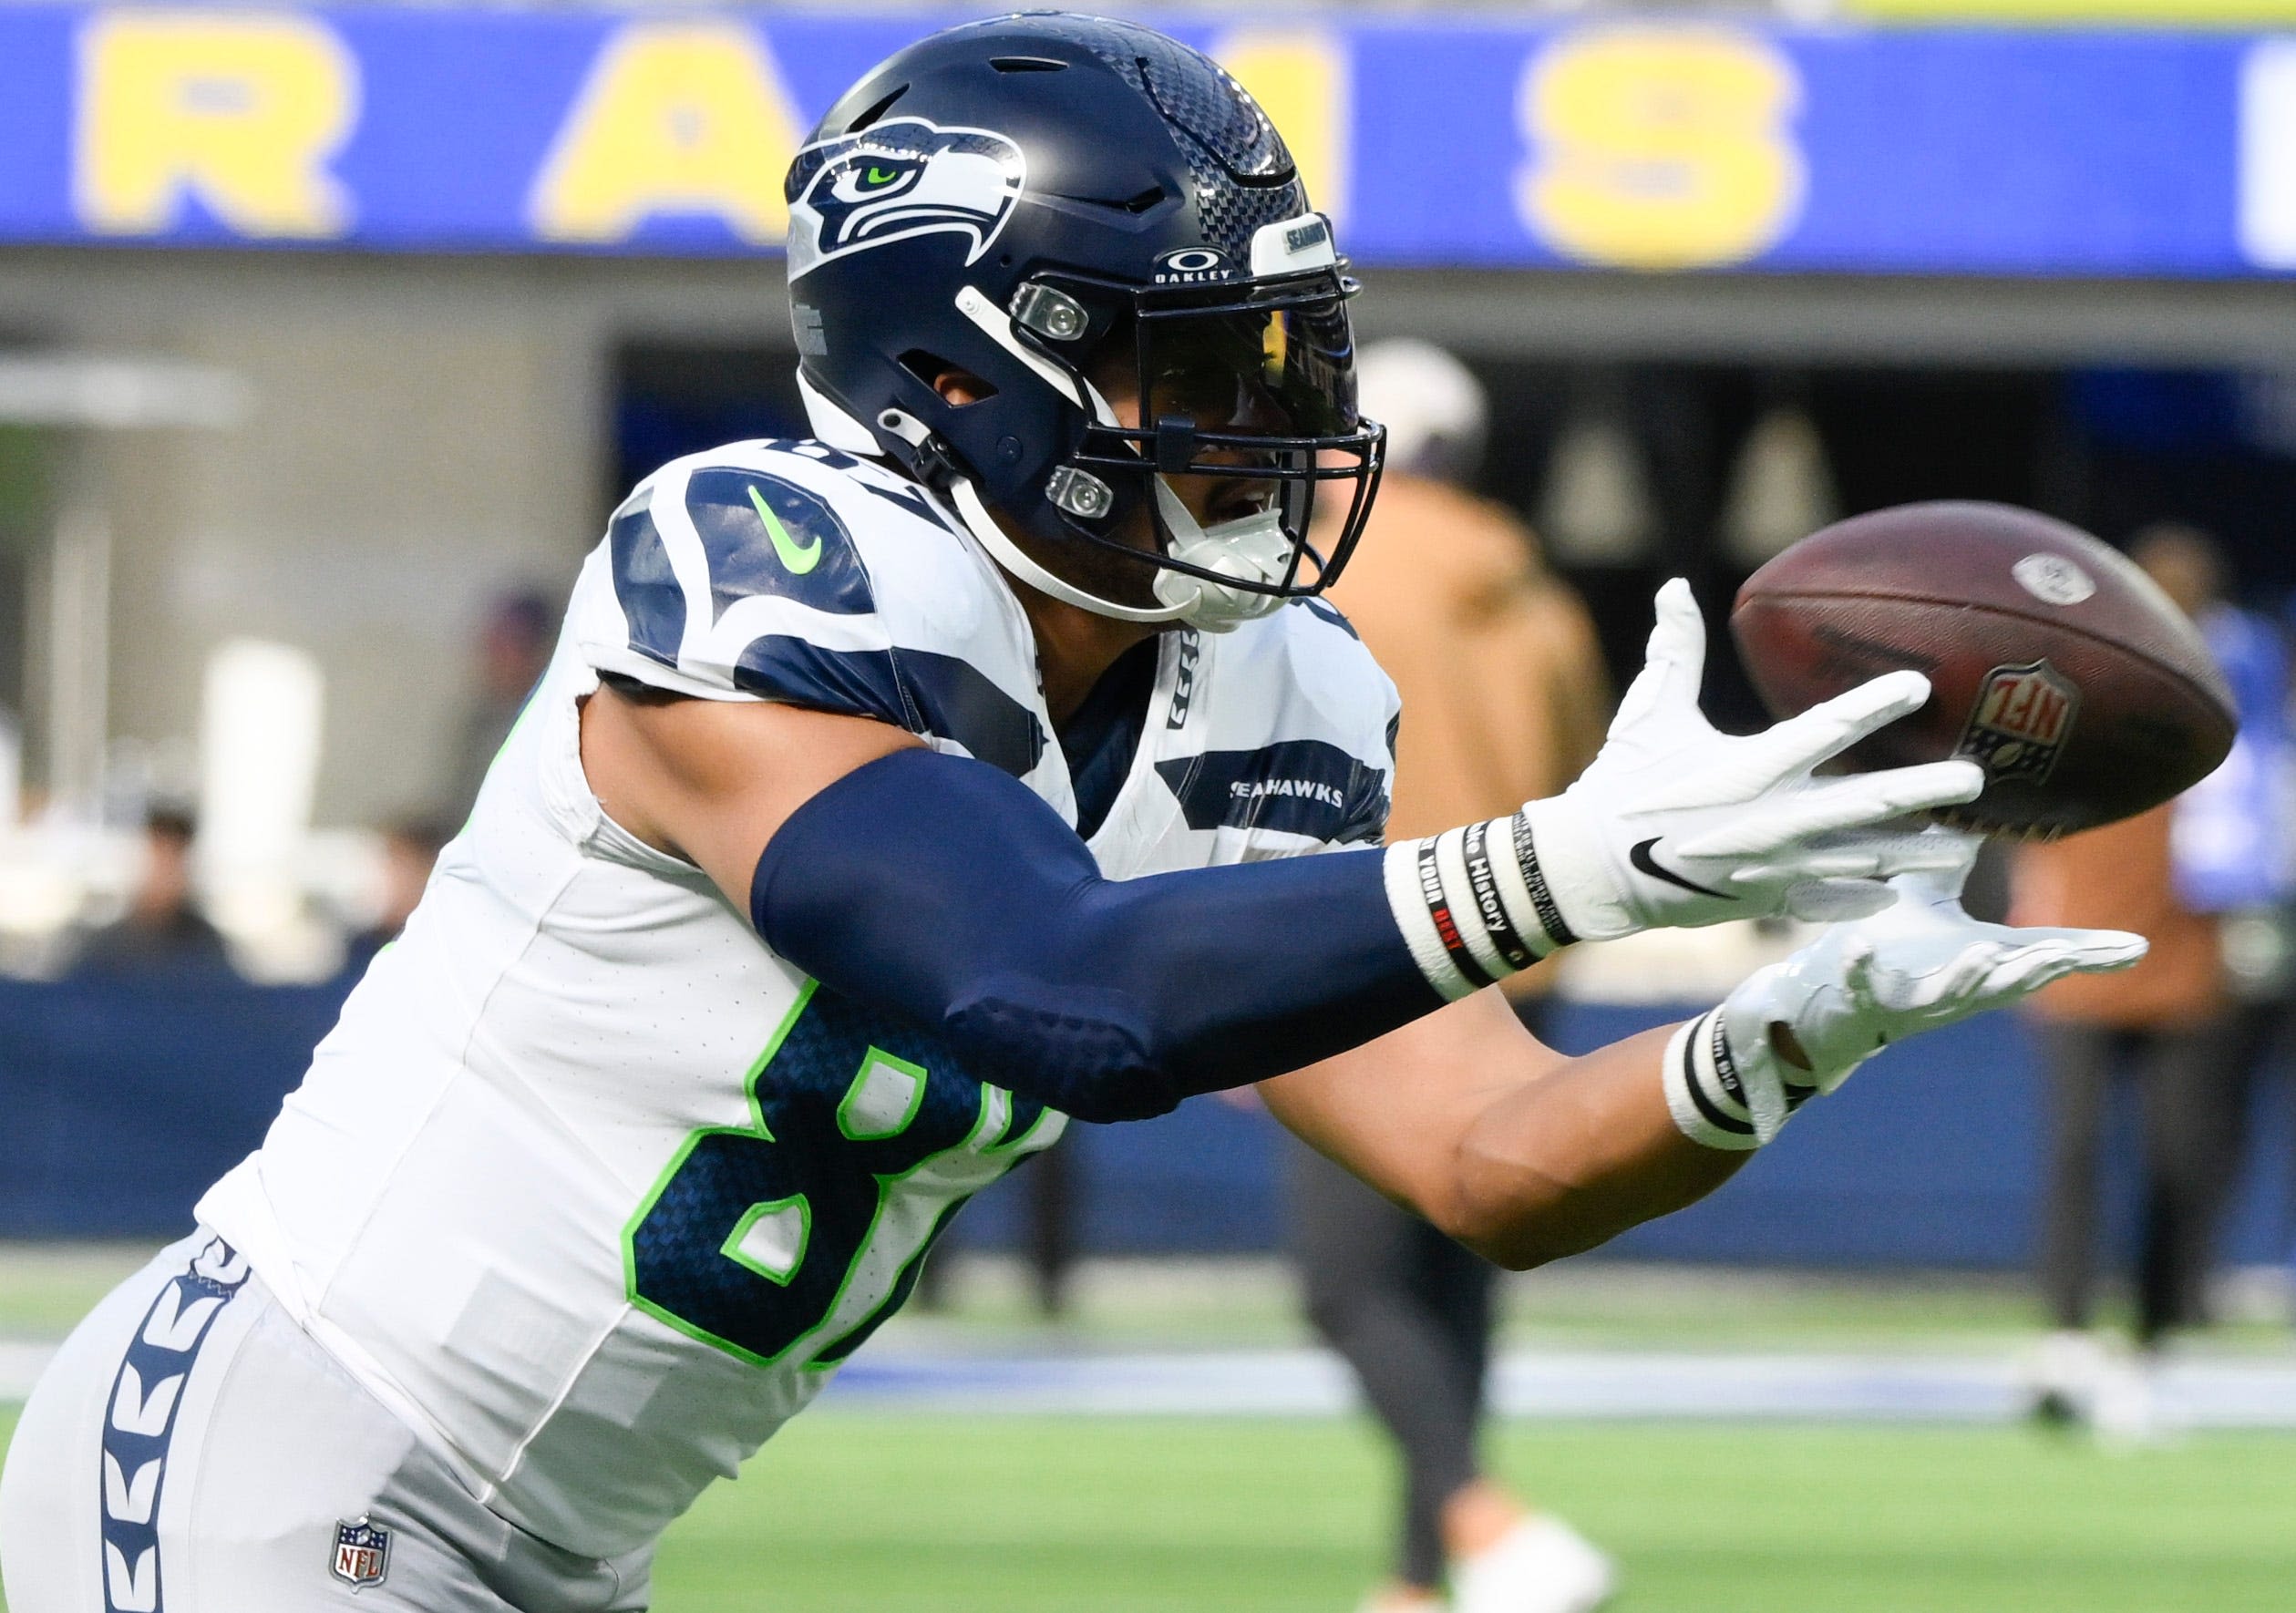 Seahawks TE Noah Fant describes what it is like to face Macdonald's defense